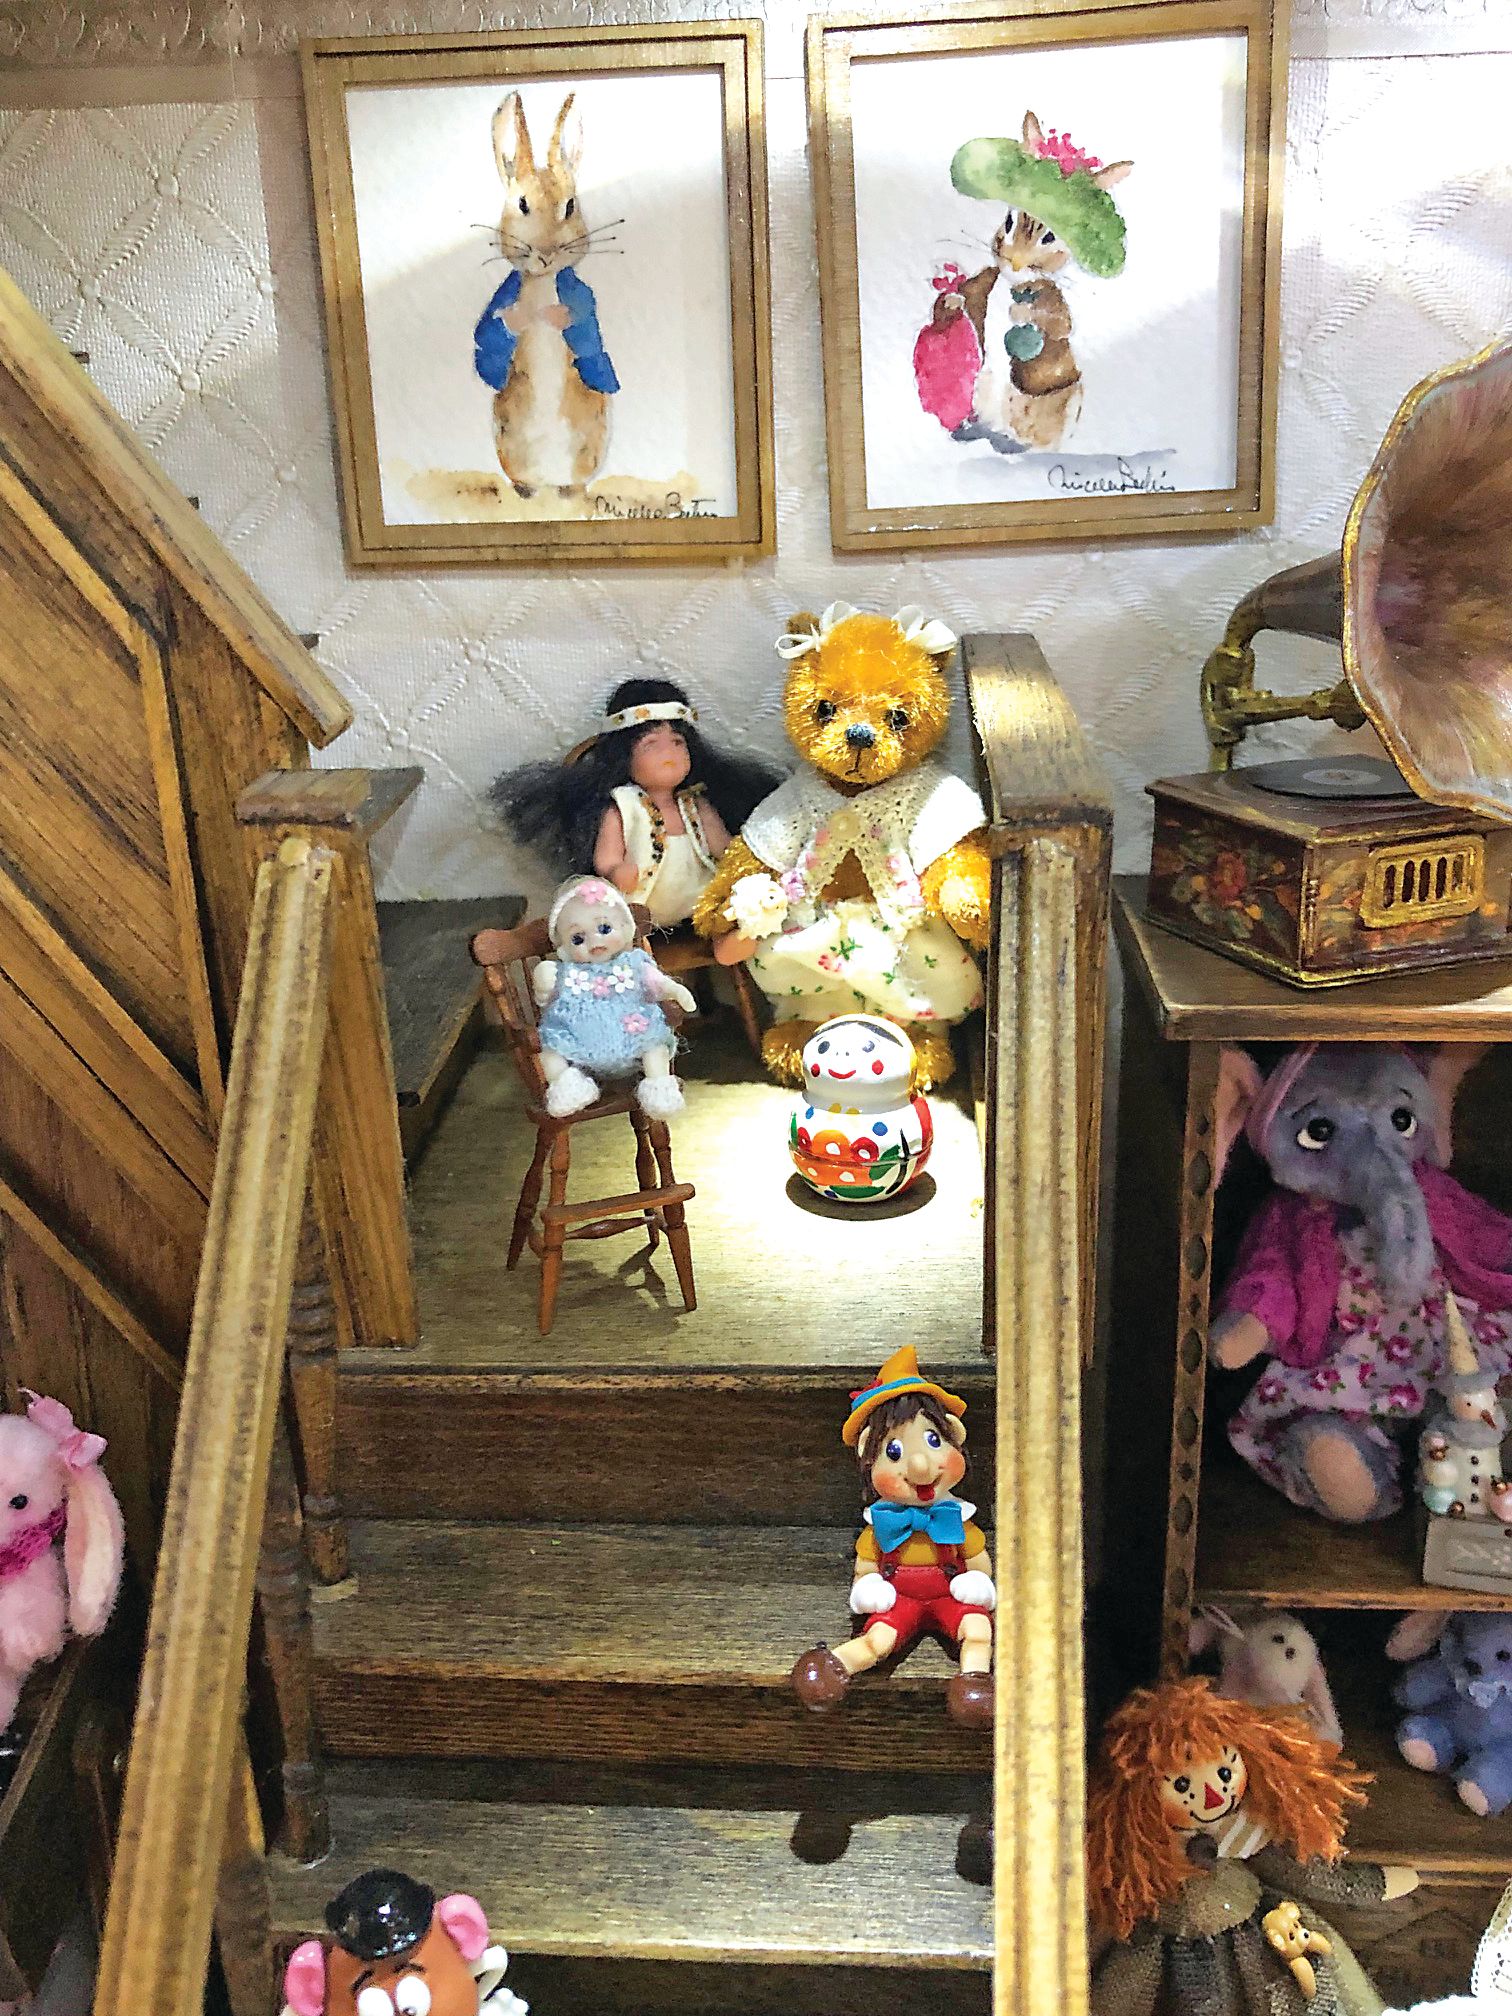 Toy shop full of imaginary friends